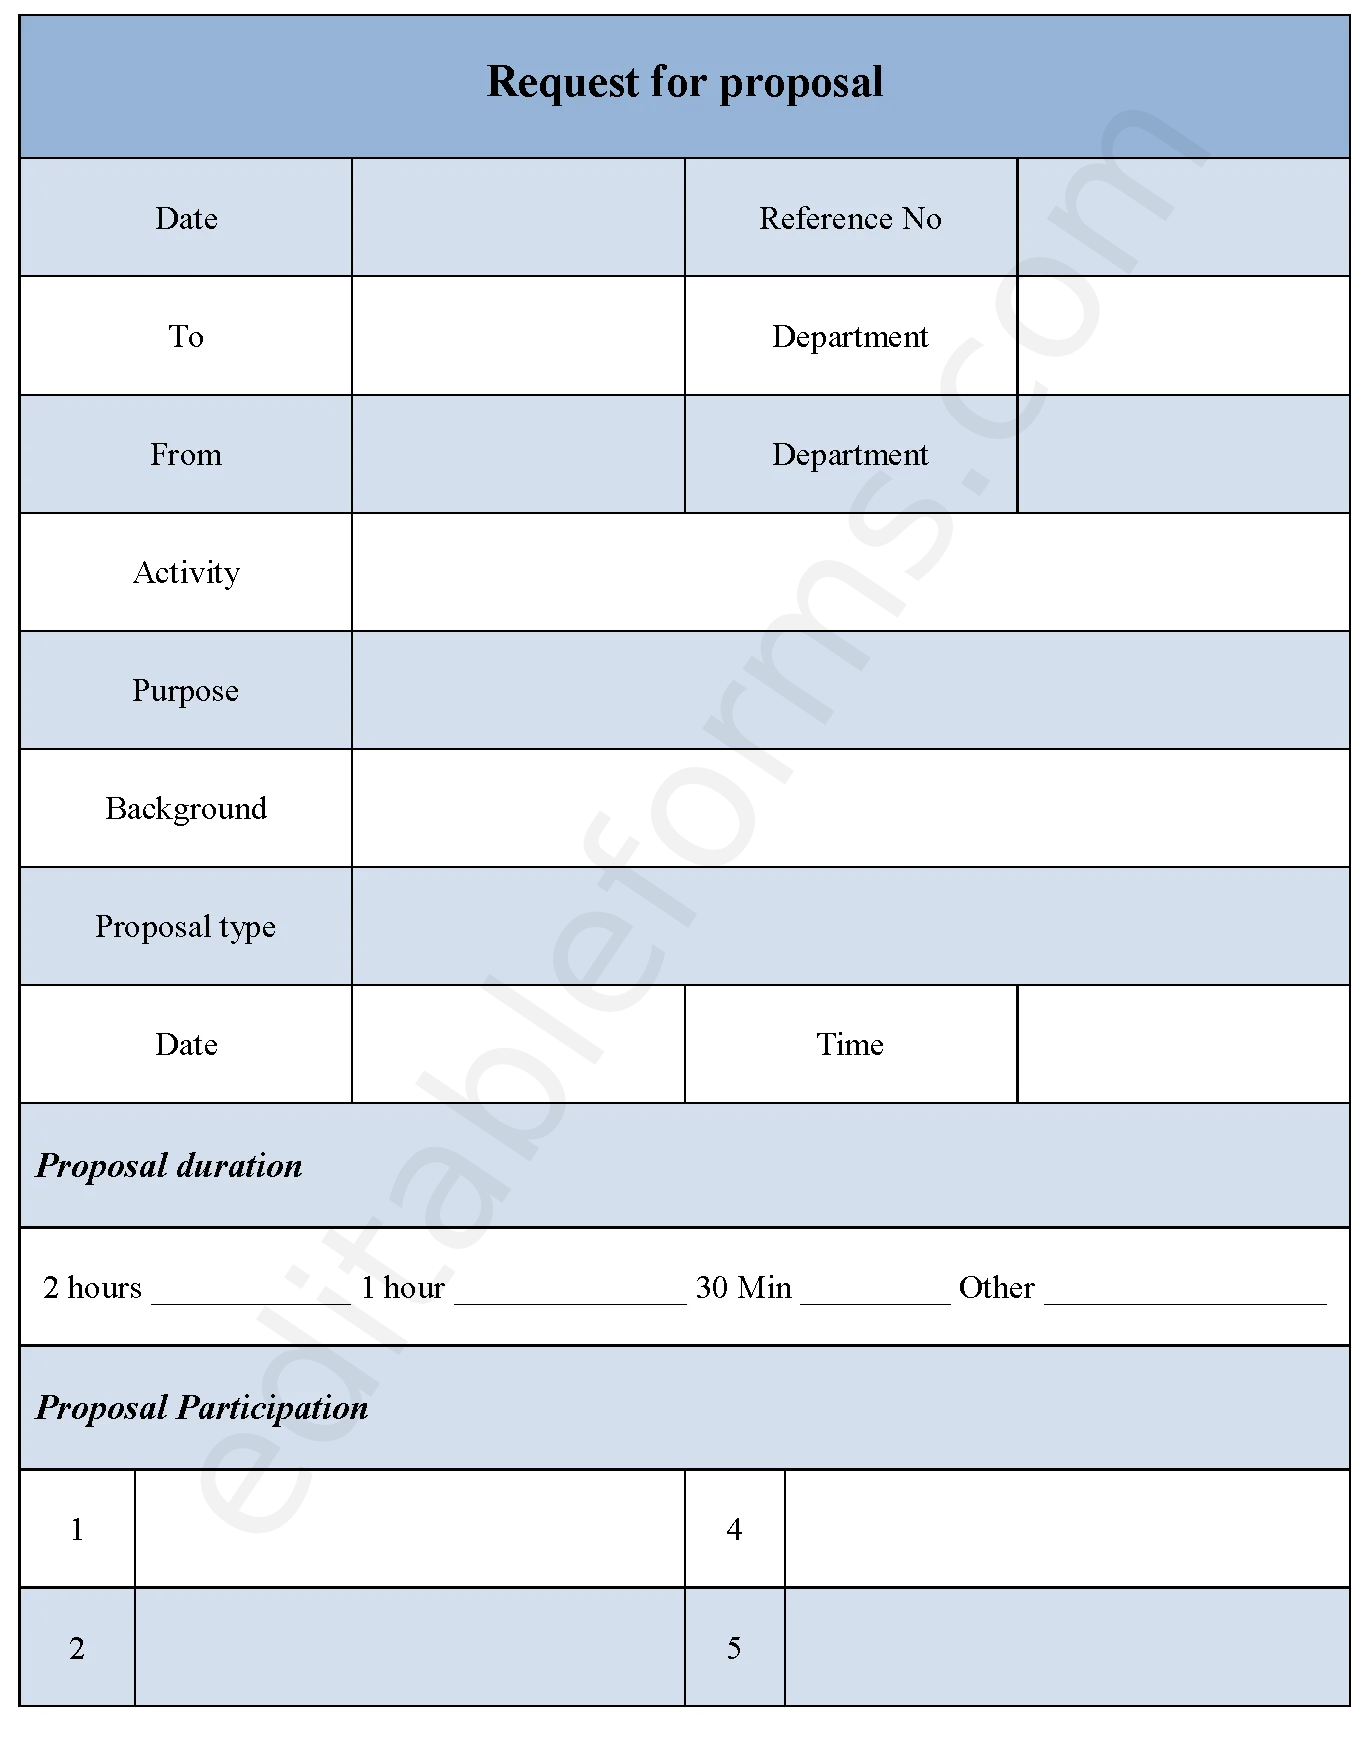 Request For Proposal Fillable PDF Template